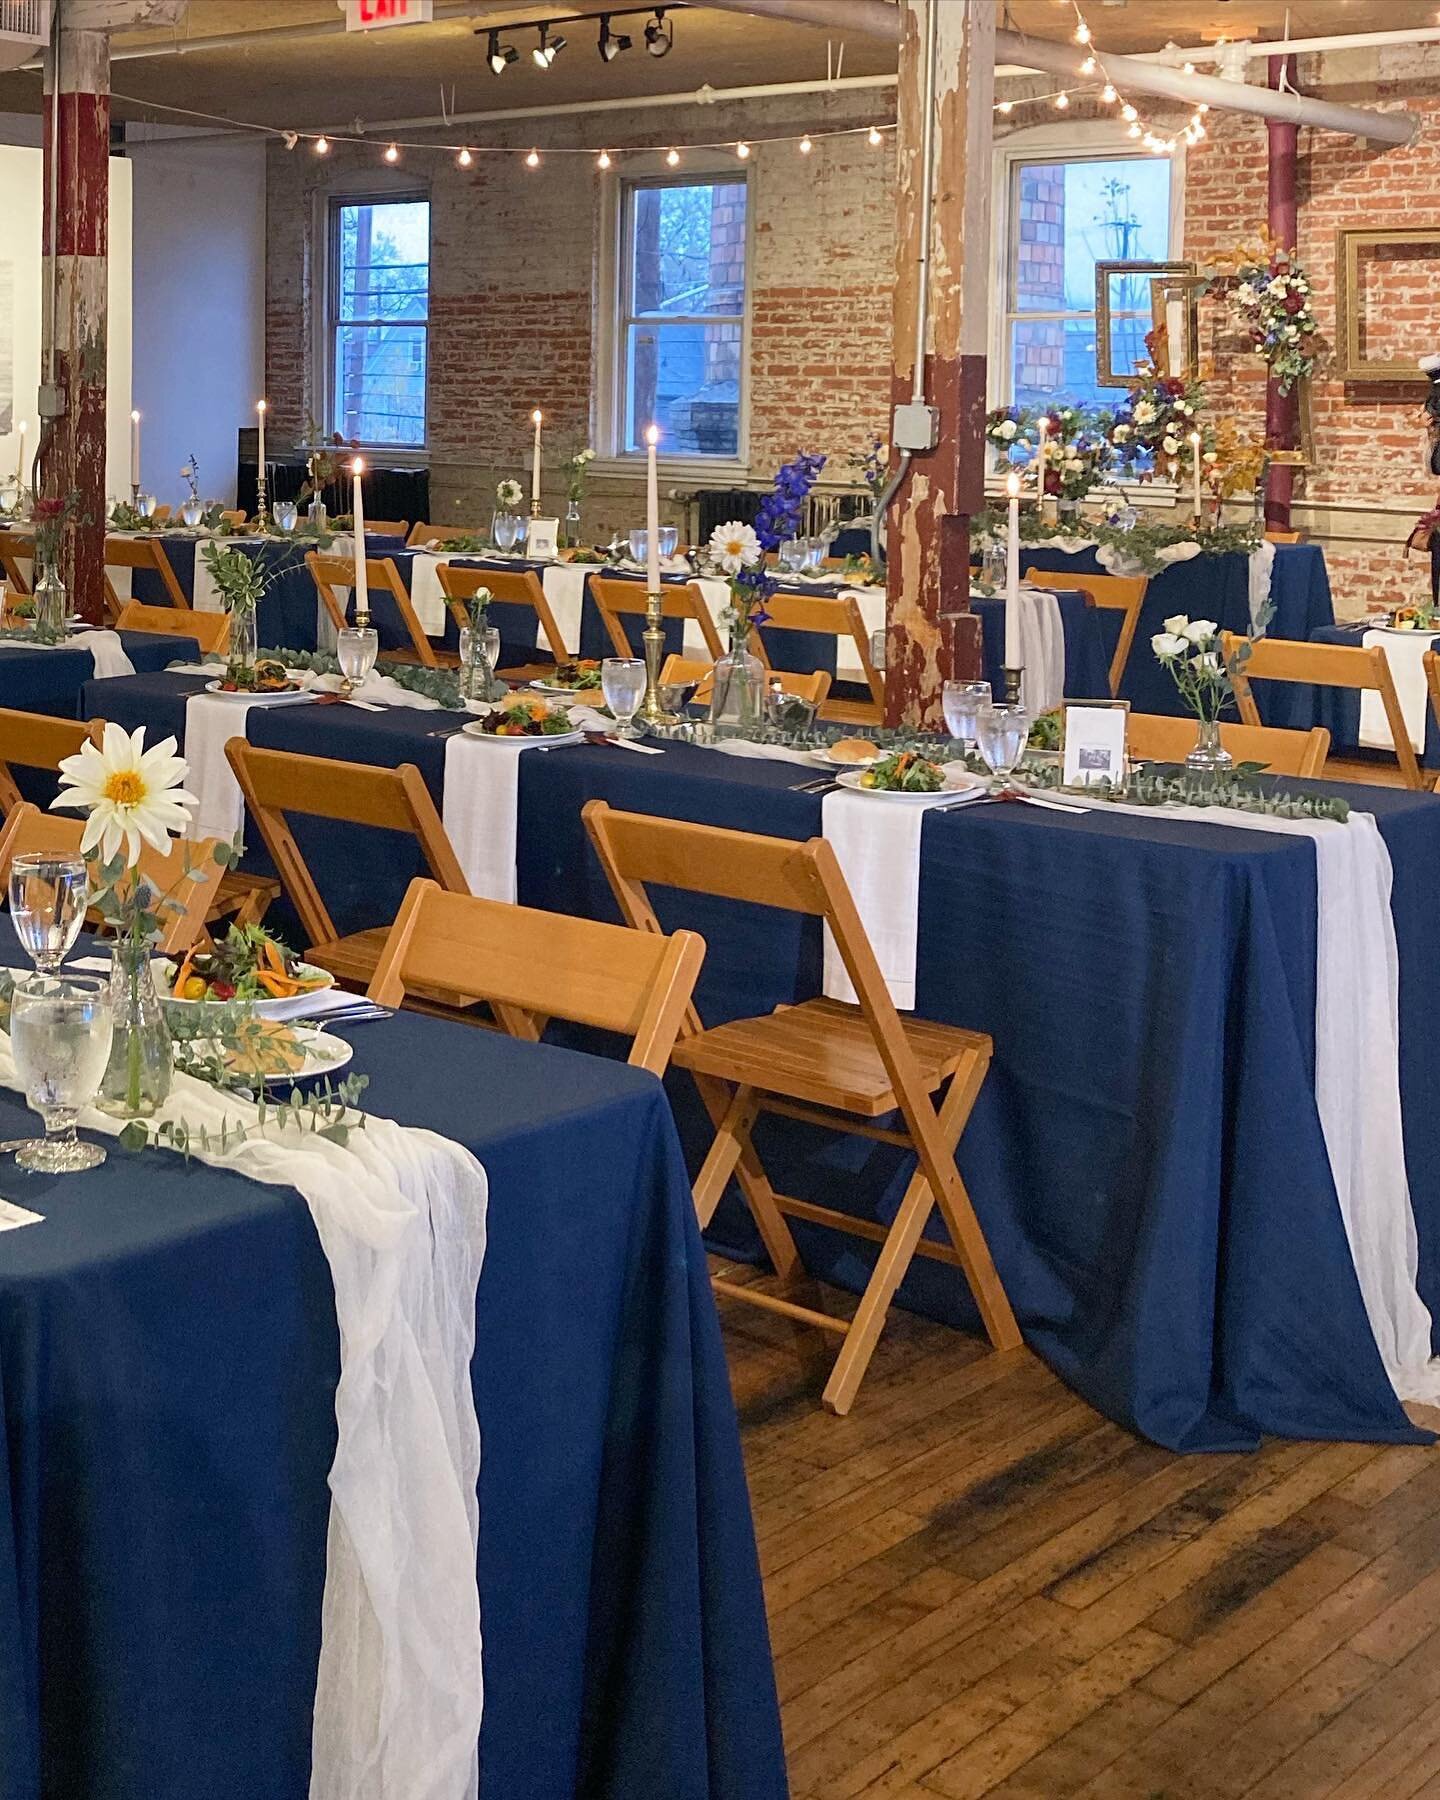 Can we just talk about how pretty @hedge_gallery looks set up for this wedding reception??

With seating for up to 100 guests and room for your bar, dance floor, and even games, this spot is ready for your more intimate wedding setting!